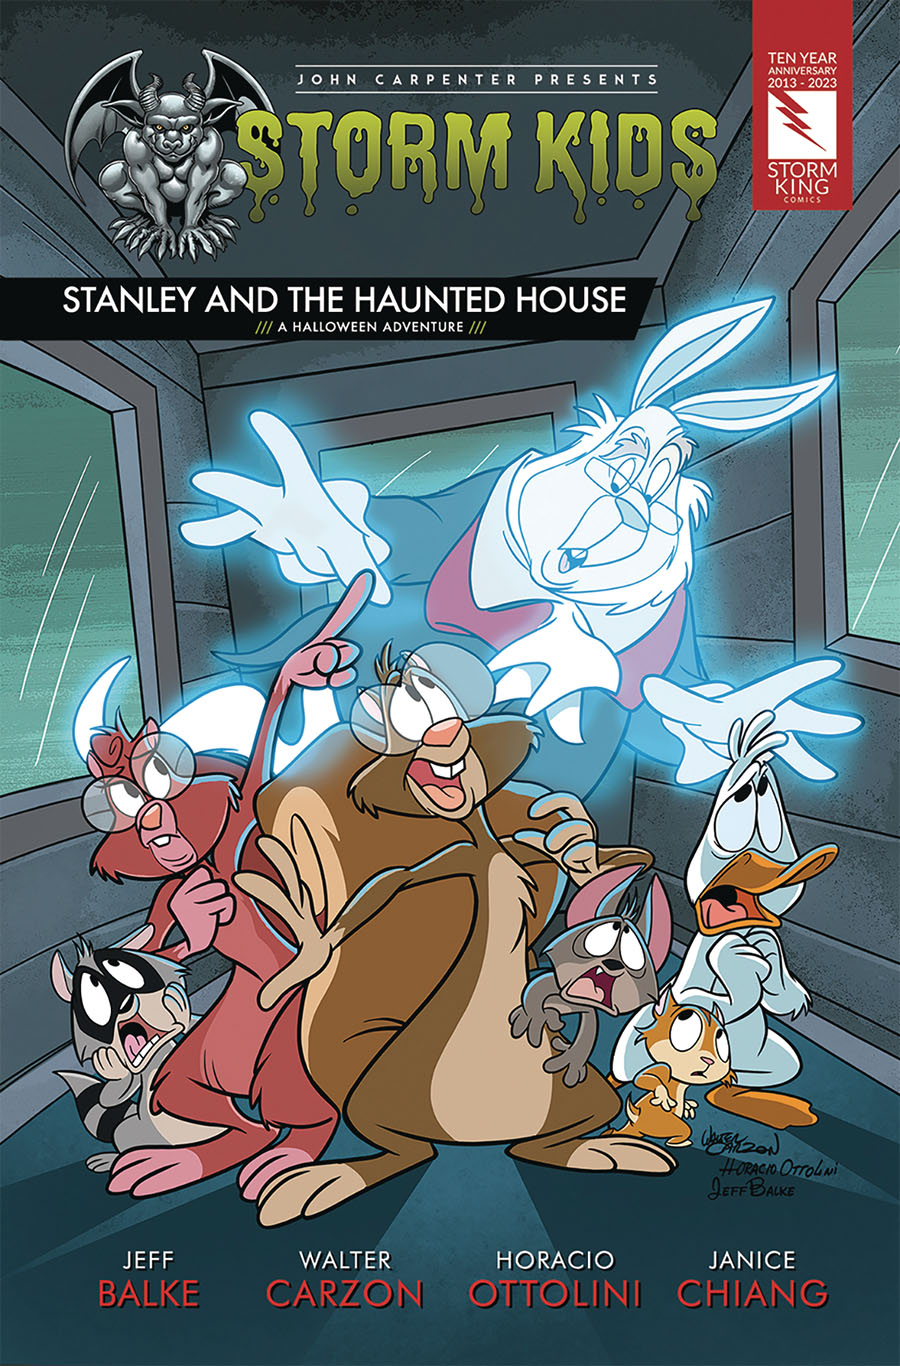 John Carpenter Presents Storm Kids Stanley And The Haunted House #1 (One Shot)